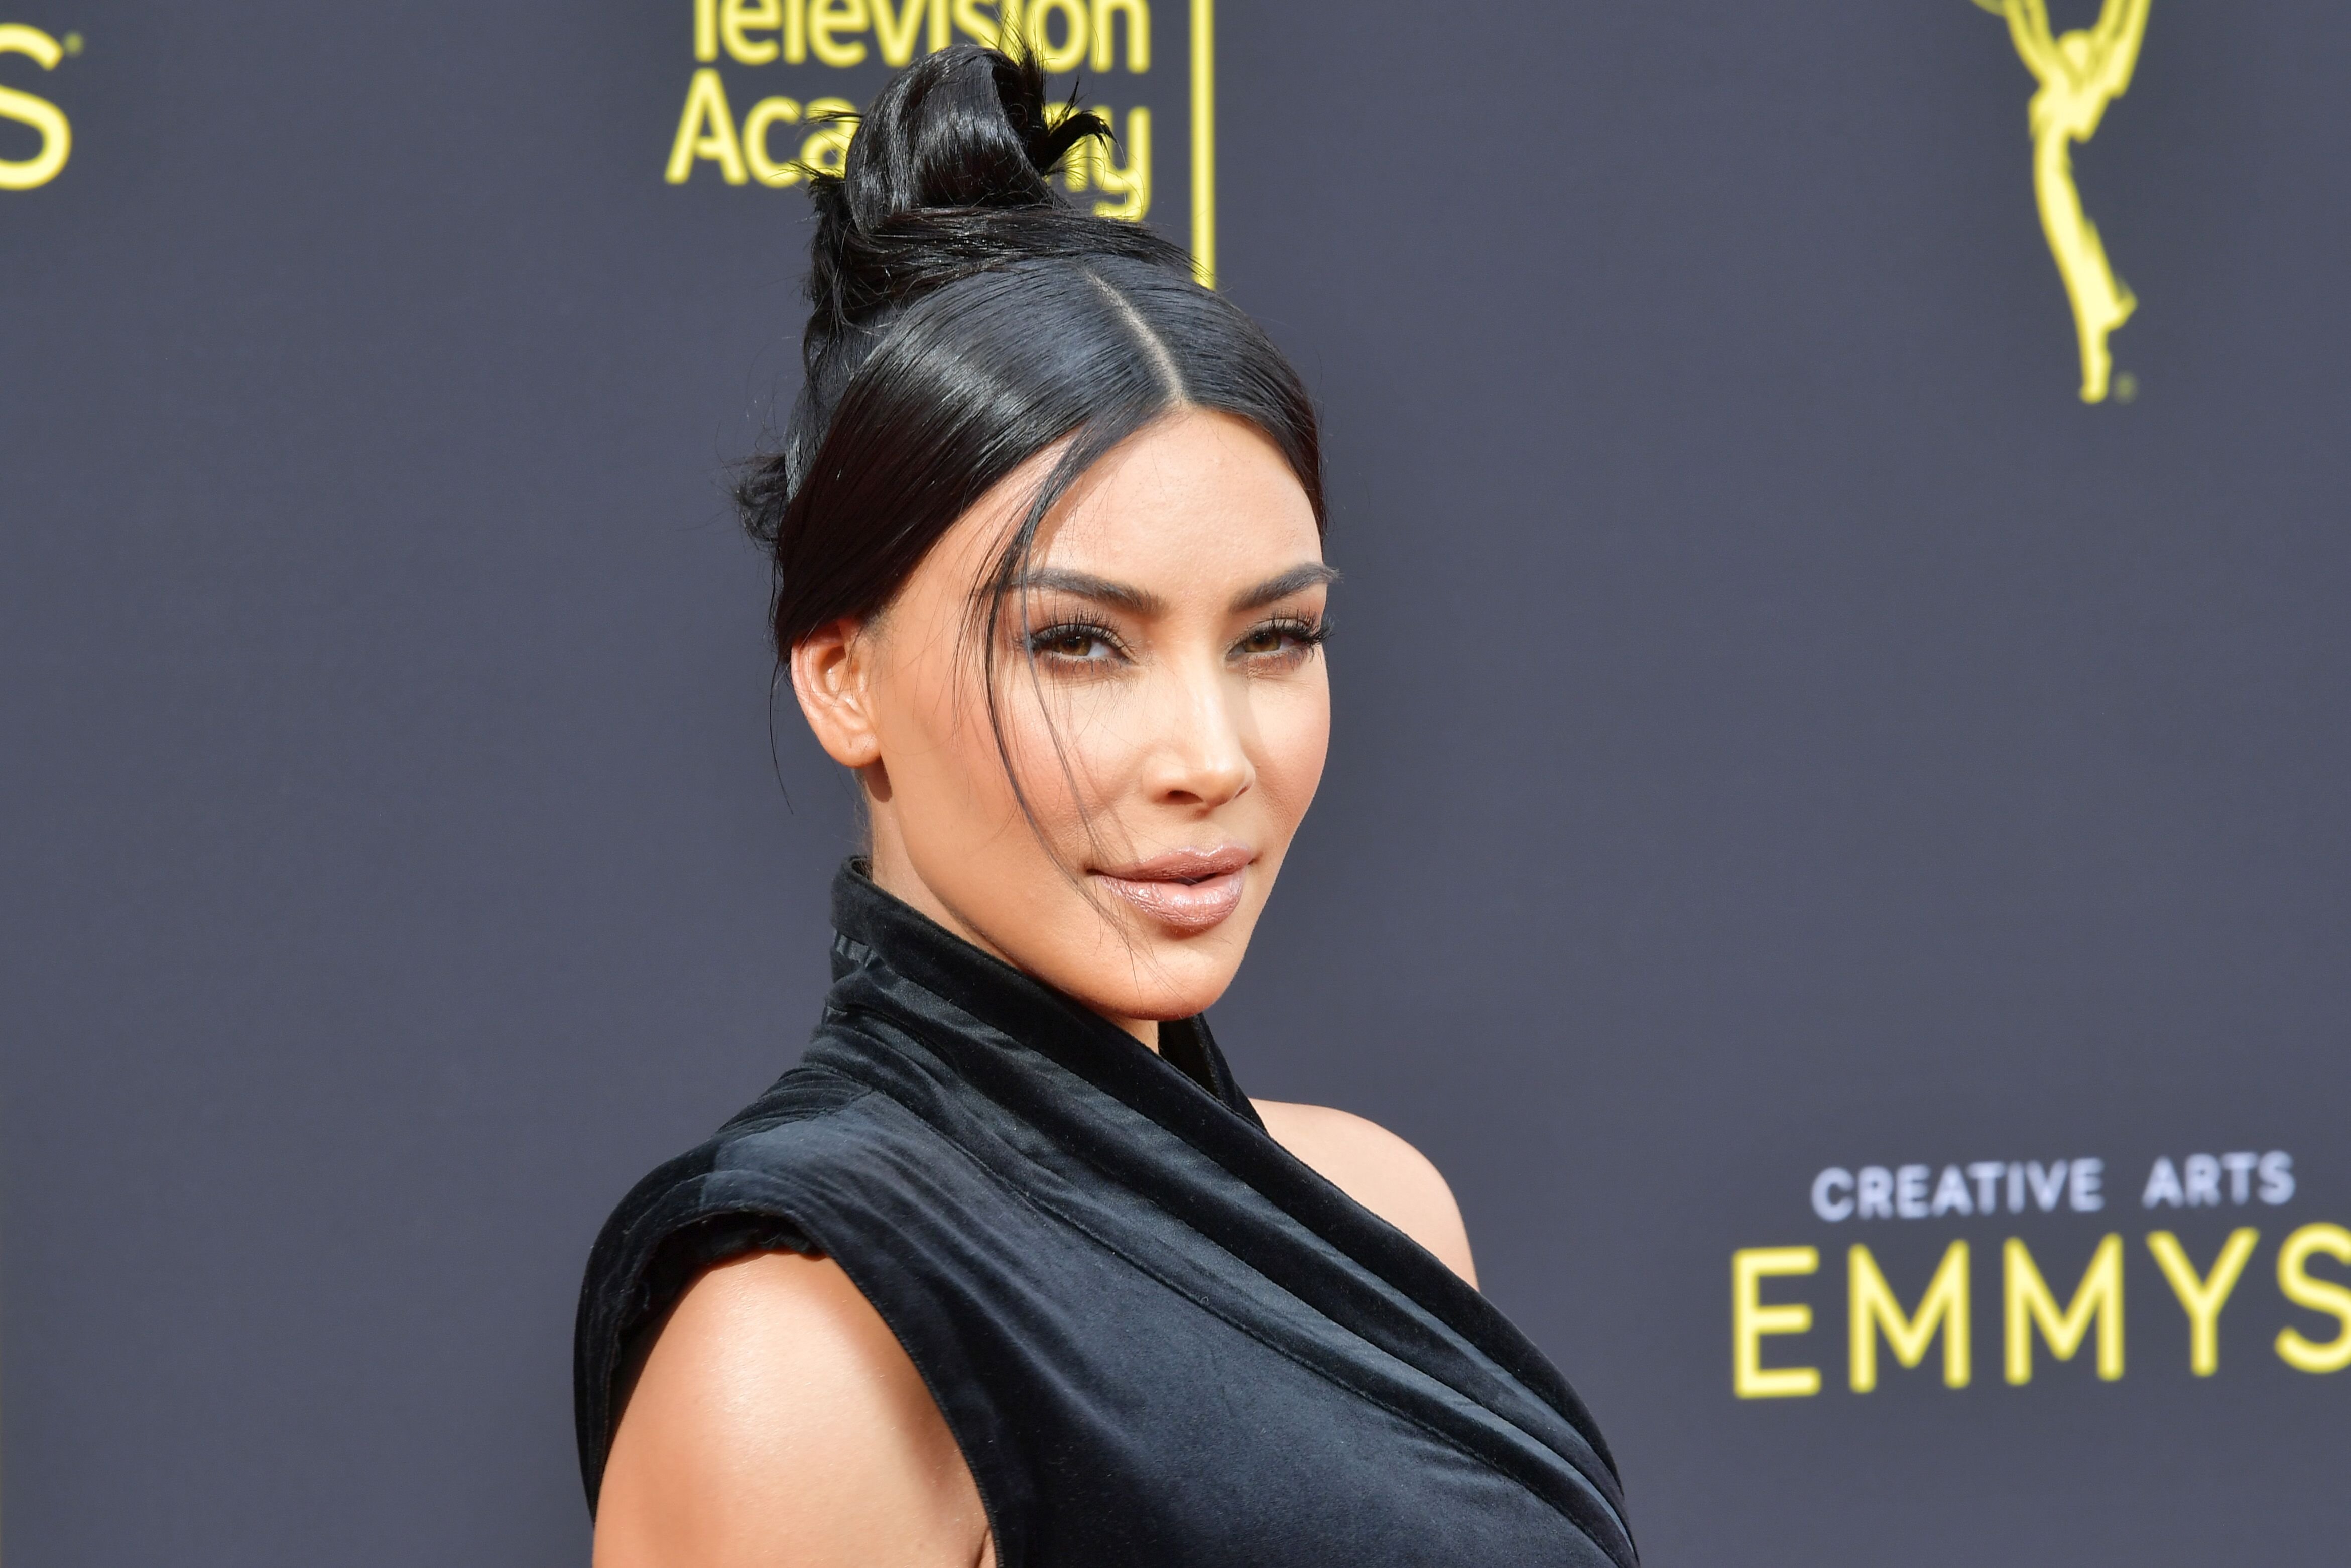 Kim Kardashian at the Creative Arts Emmy Awards on September 14, 2019, in Los Angeles, California | Photo: Getty Images